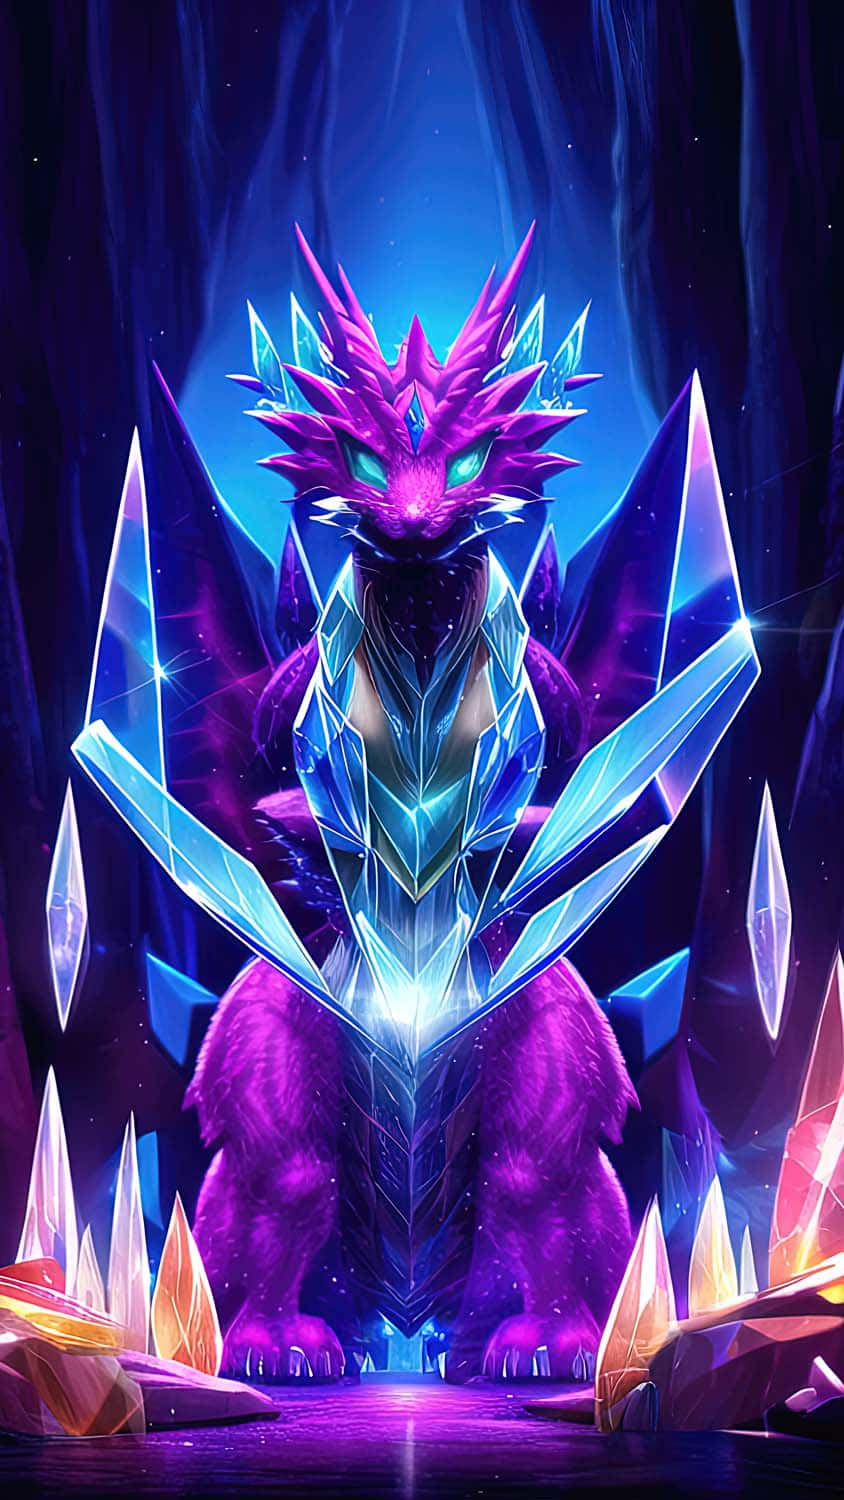 Crystal Dragon IPhone Wallpaper HD  IPhone Wallpapers